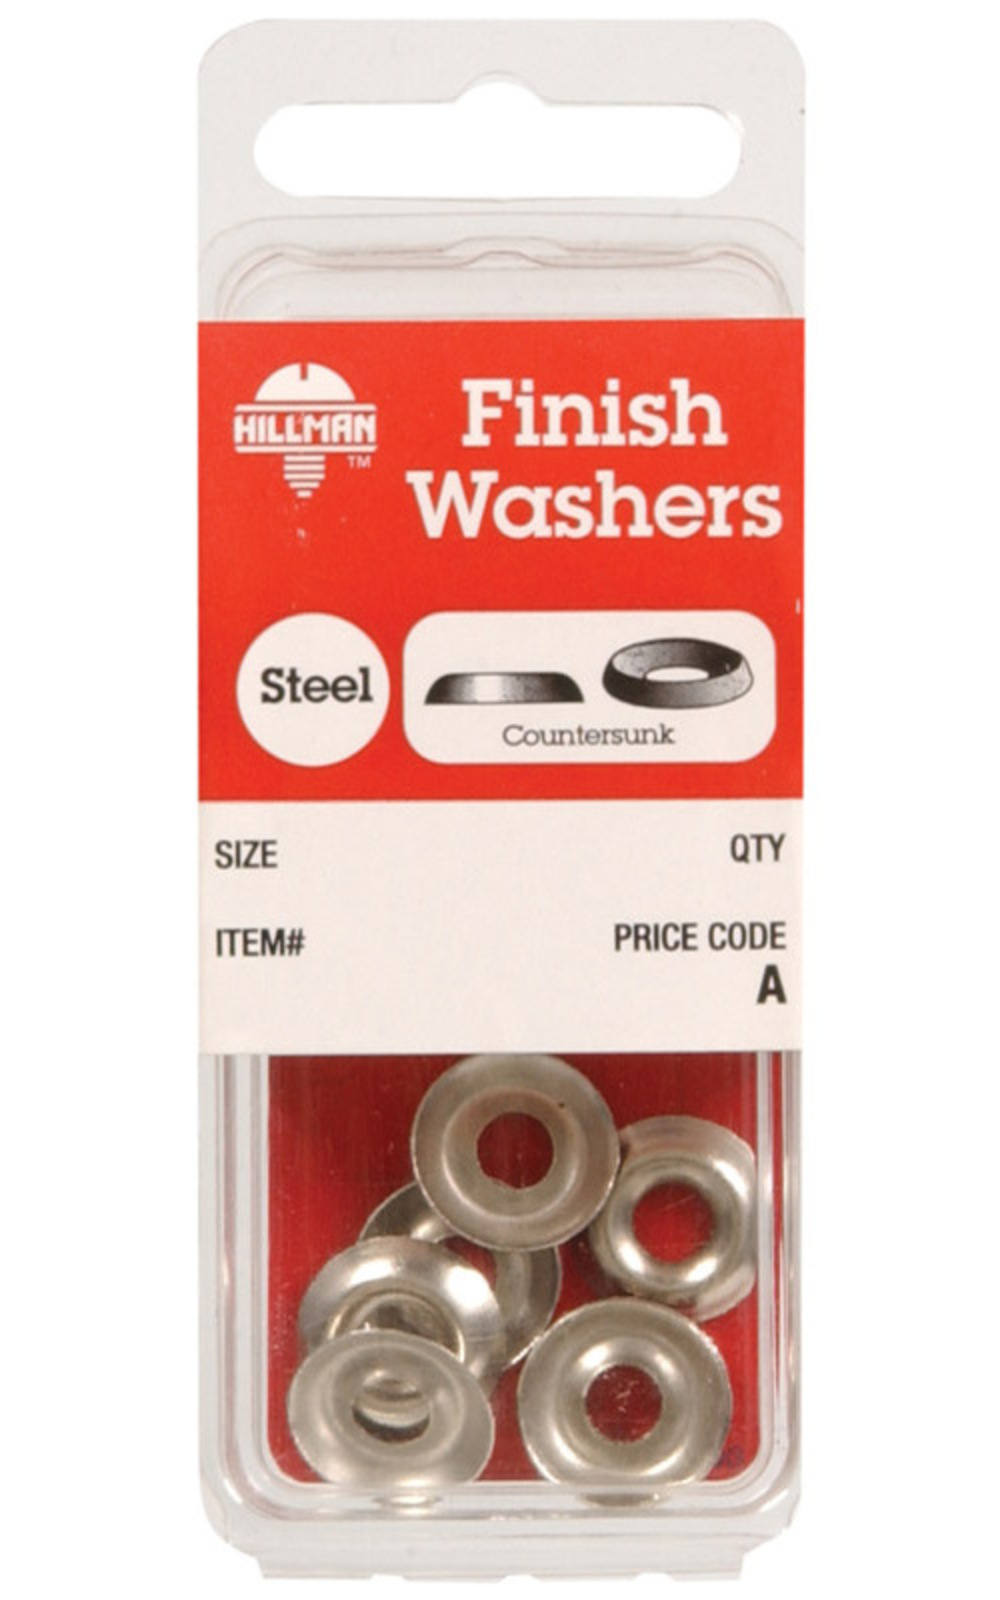 Hillman Nickel-Plated Steel .190 in. Finish Washer 10 pk - image 2 of 2